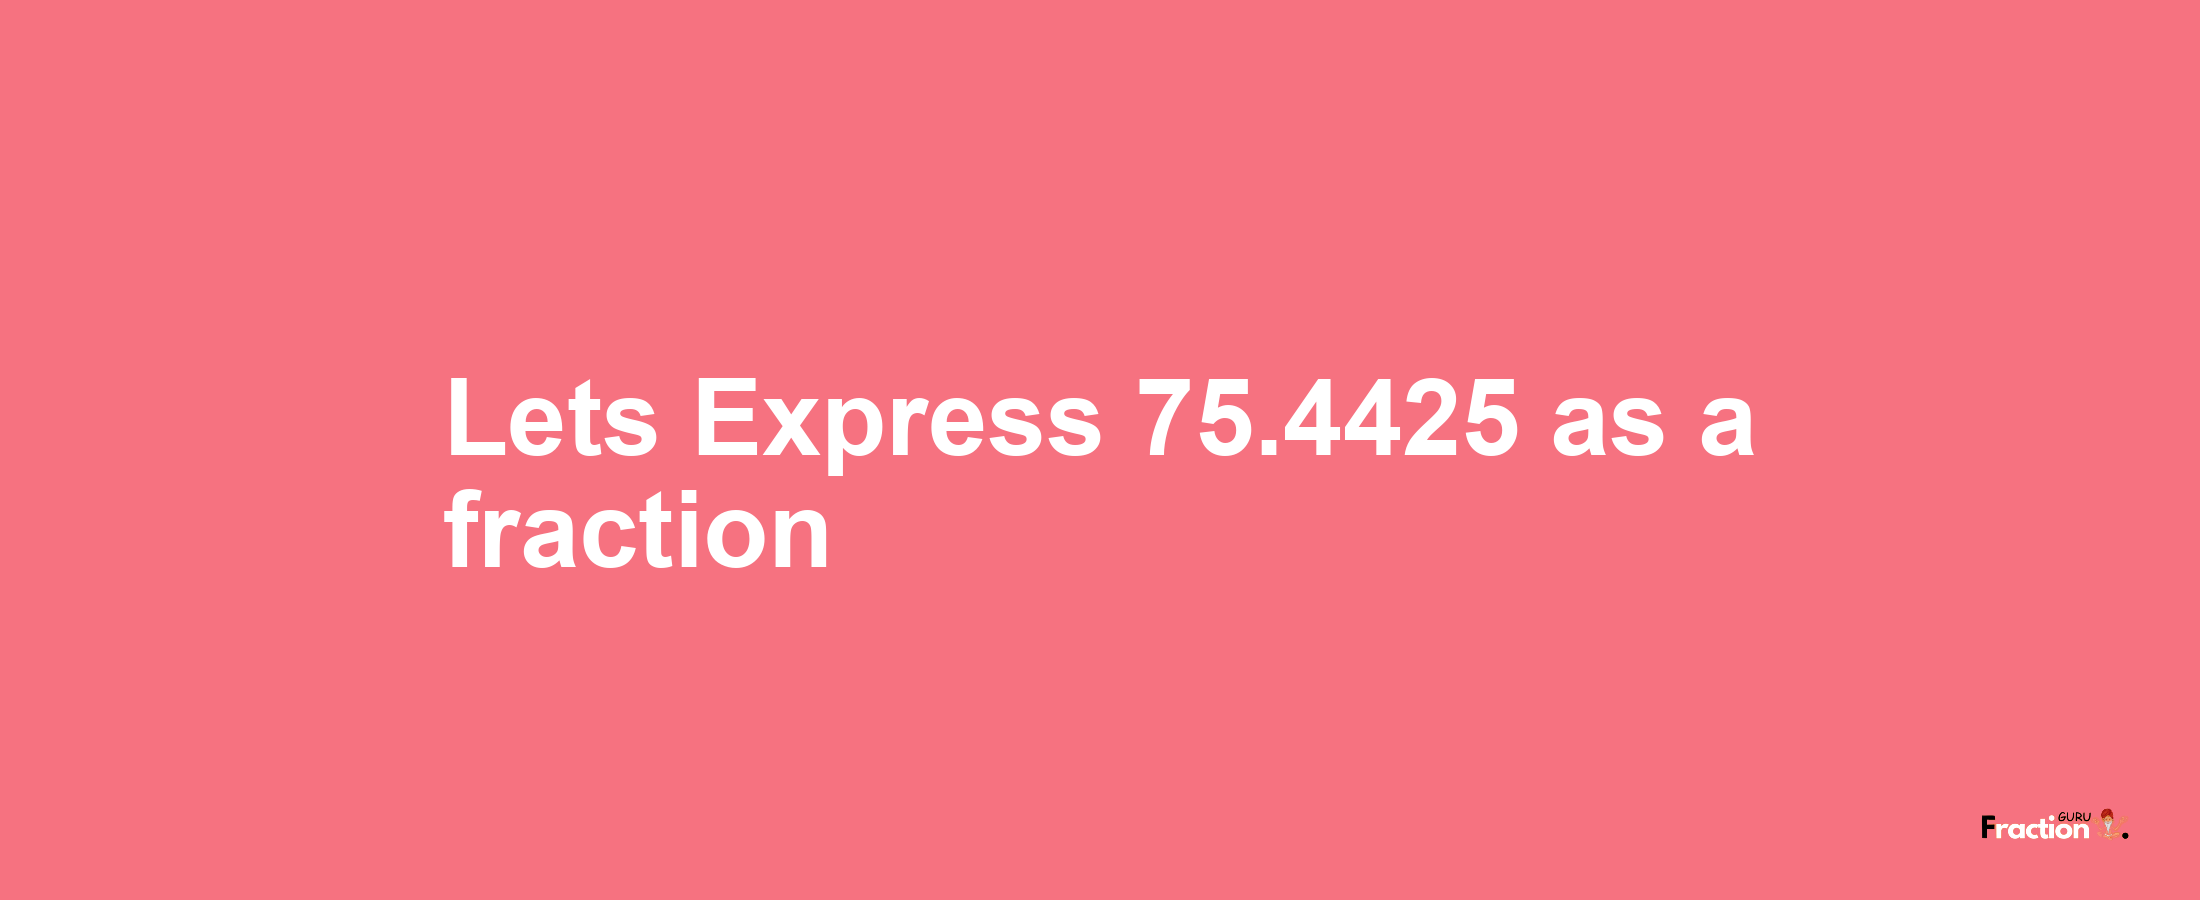 Lets Express 75.4425 as afraction